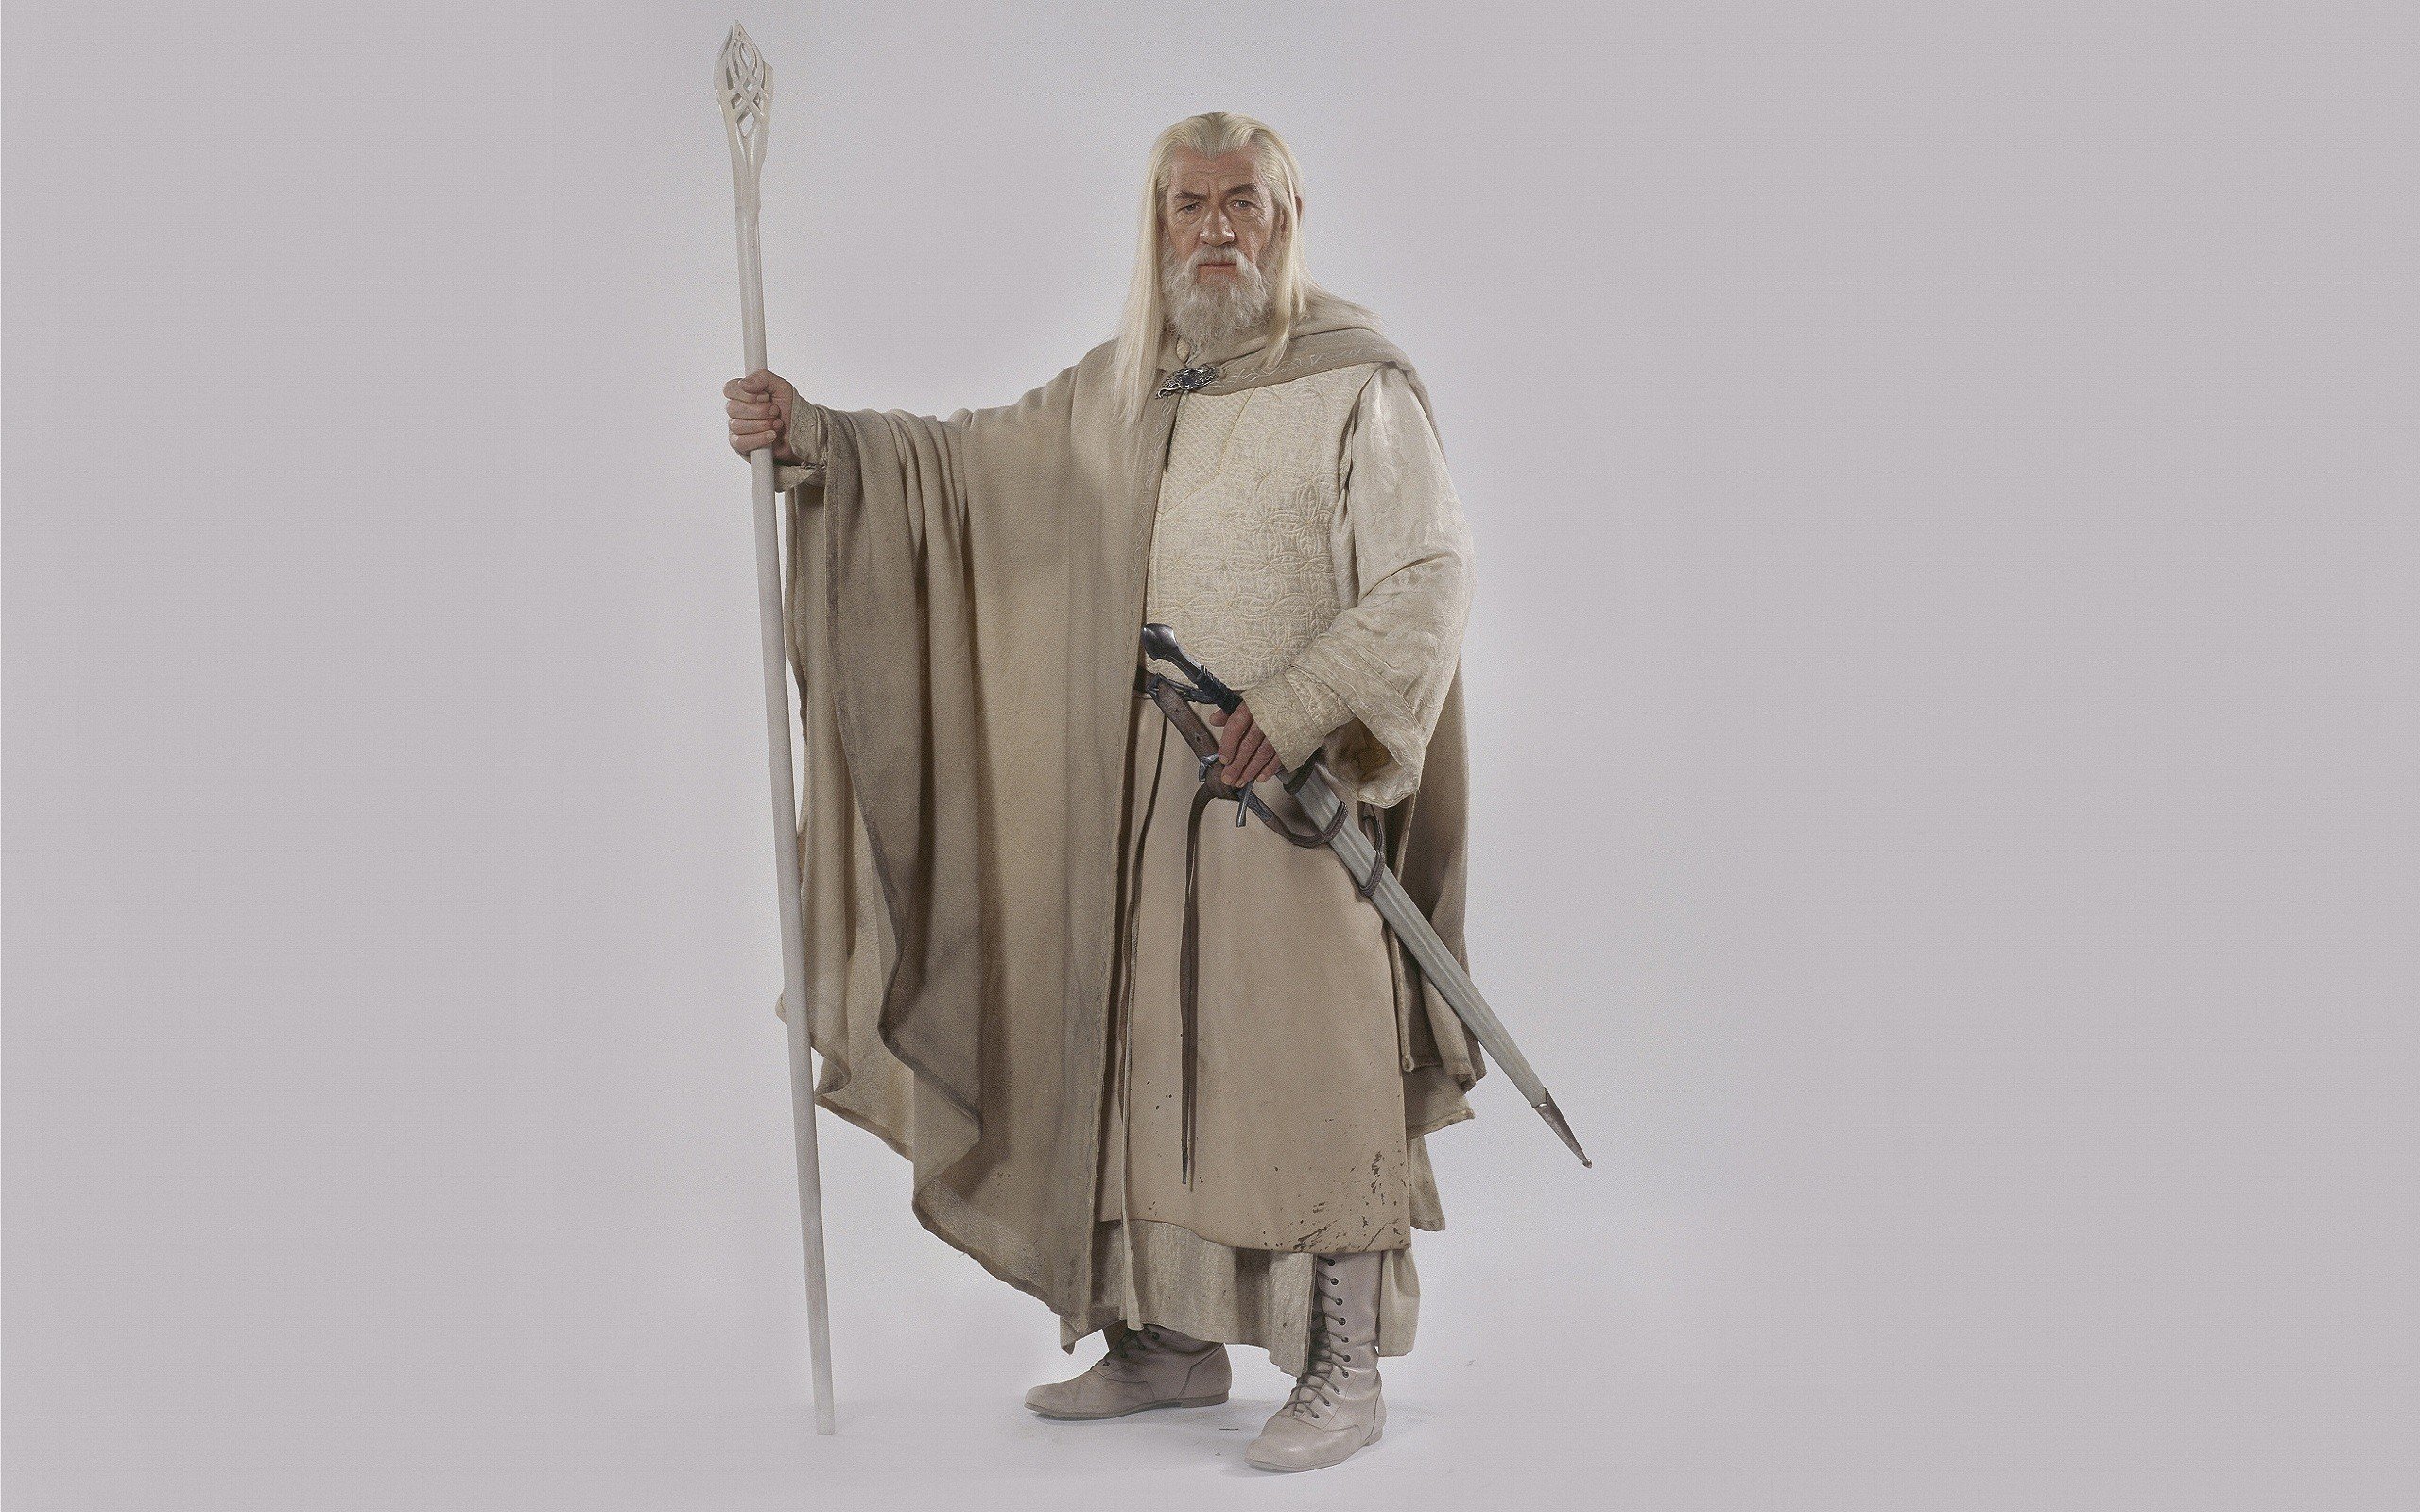 mage, Gandalf, The, Lord, Of, The, Rings, Wizards, Warriors, Ian, Mckellen, The, White, Rider, Gandalf, The, White Wallpaper